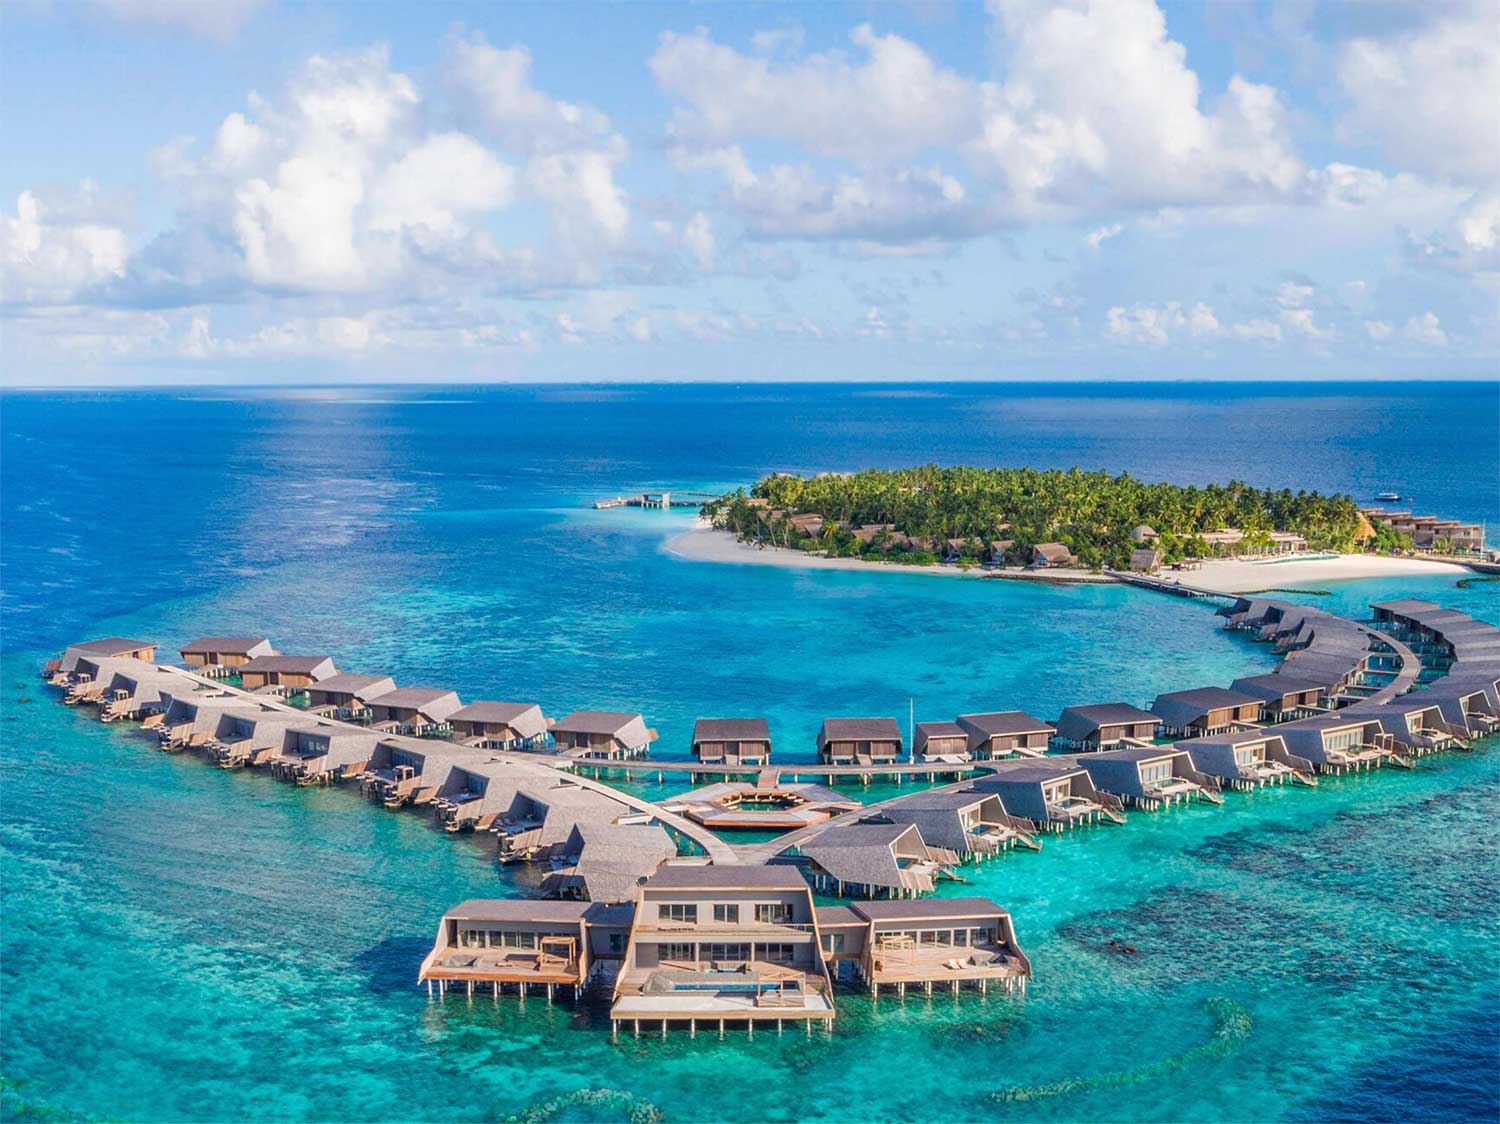 Best Hotels And Resorts In The Maldives | Islands